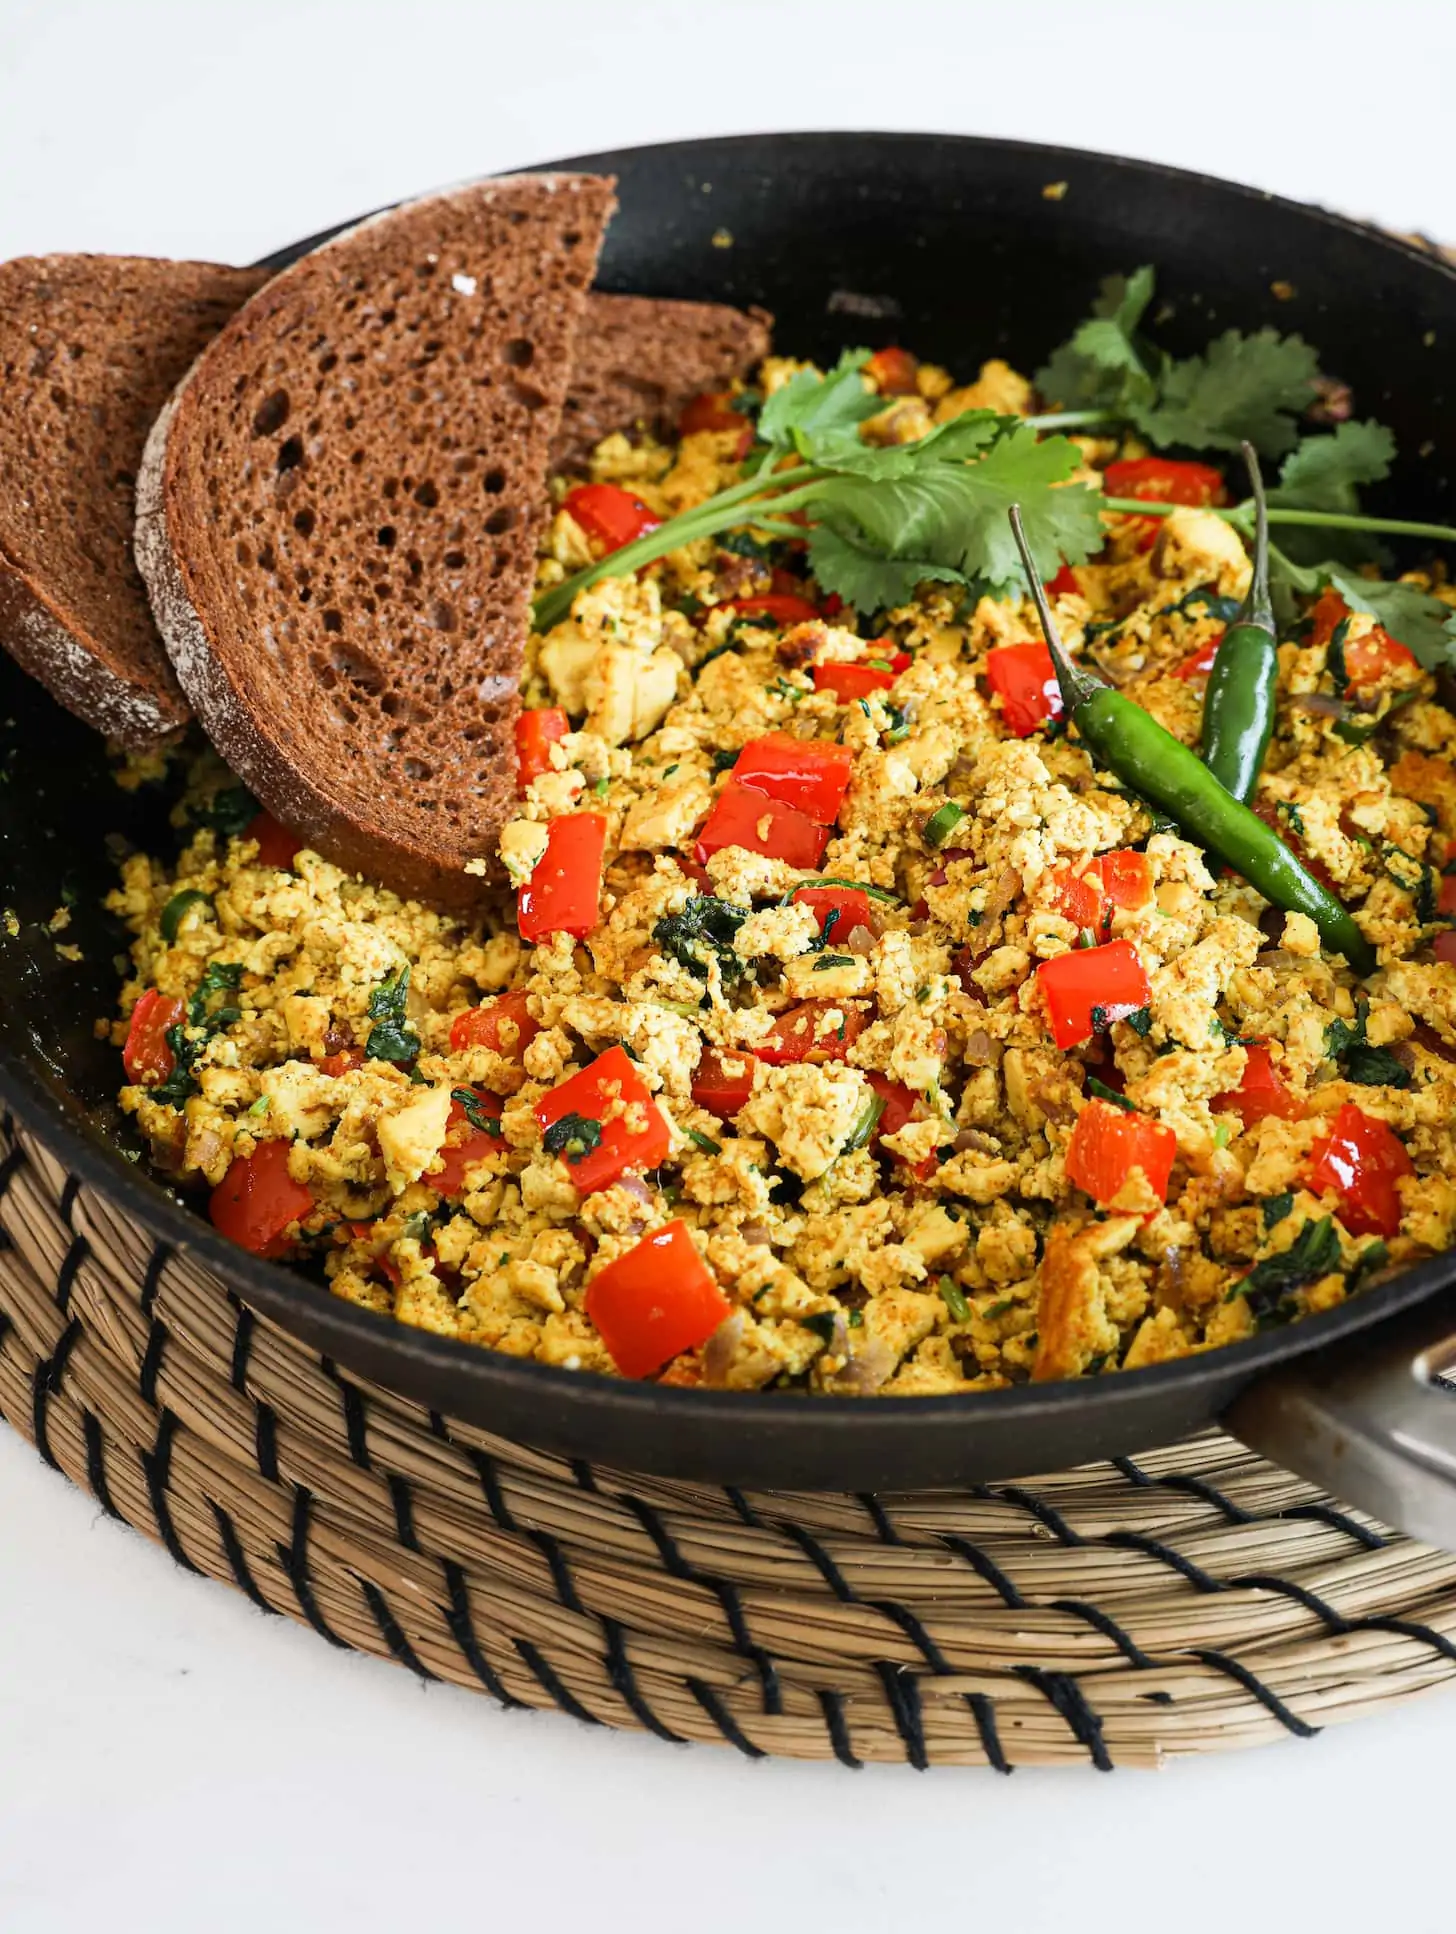 Perspective image of a fry pan of scramble with red pepper cubes topped with cilantro and green chilli and two slices of pumpernickel bread placed on top. Pan is placed on a rope place mat.